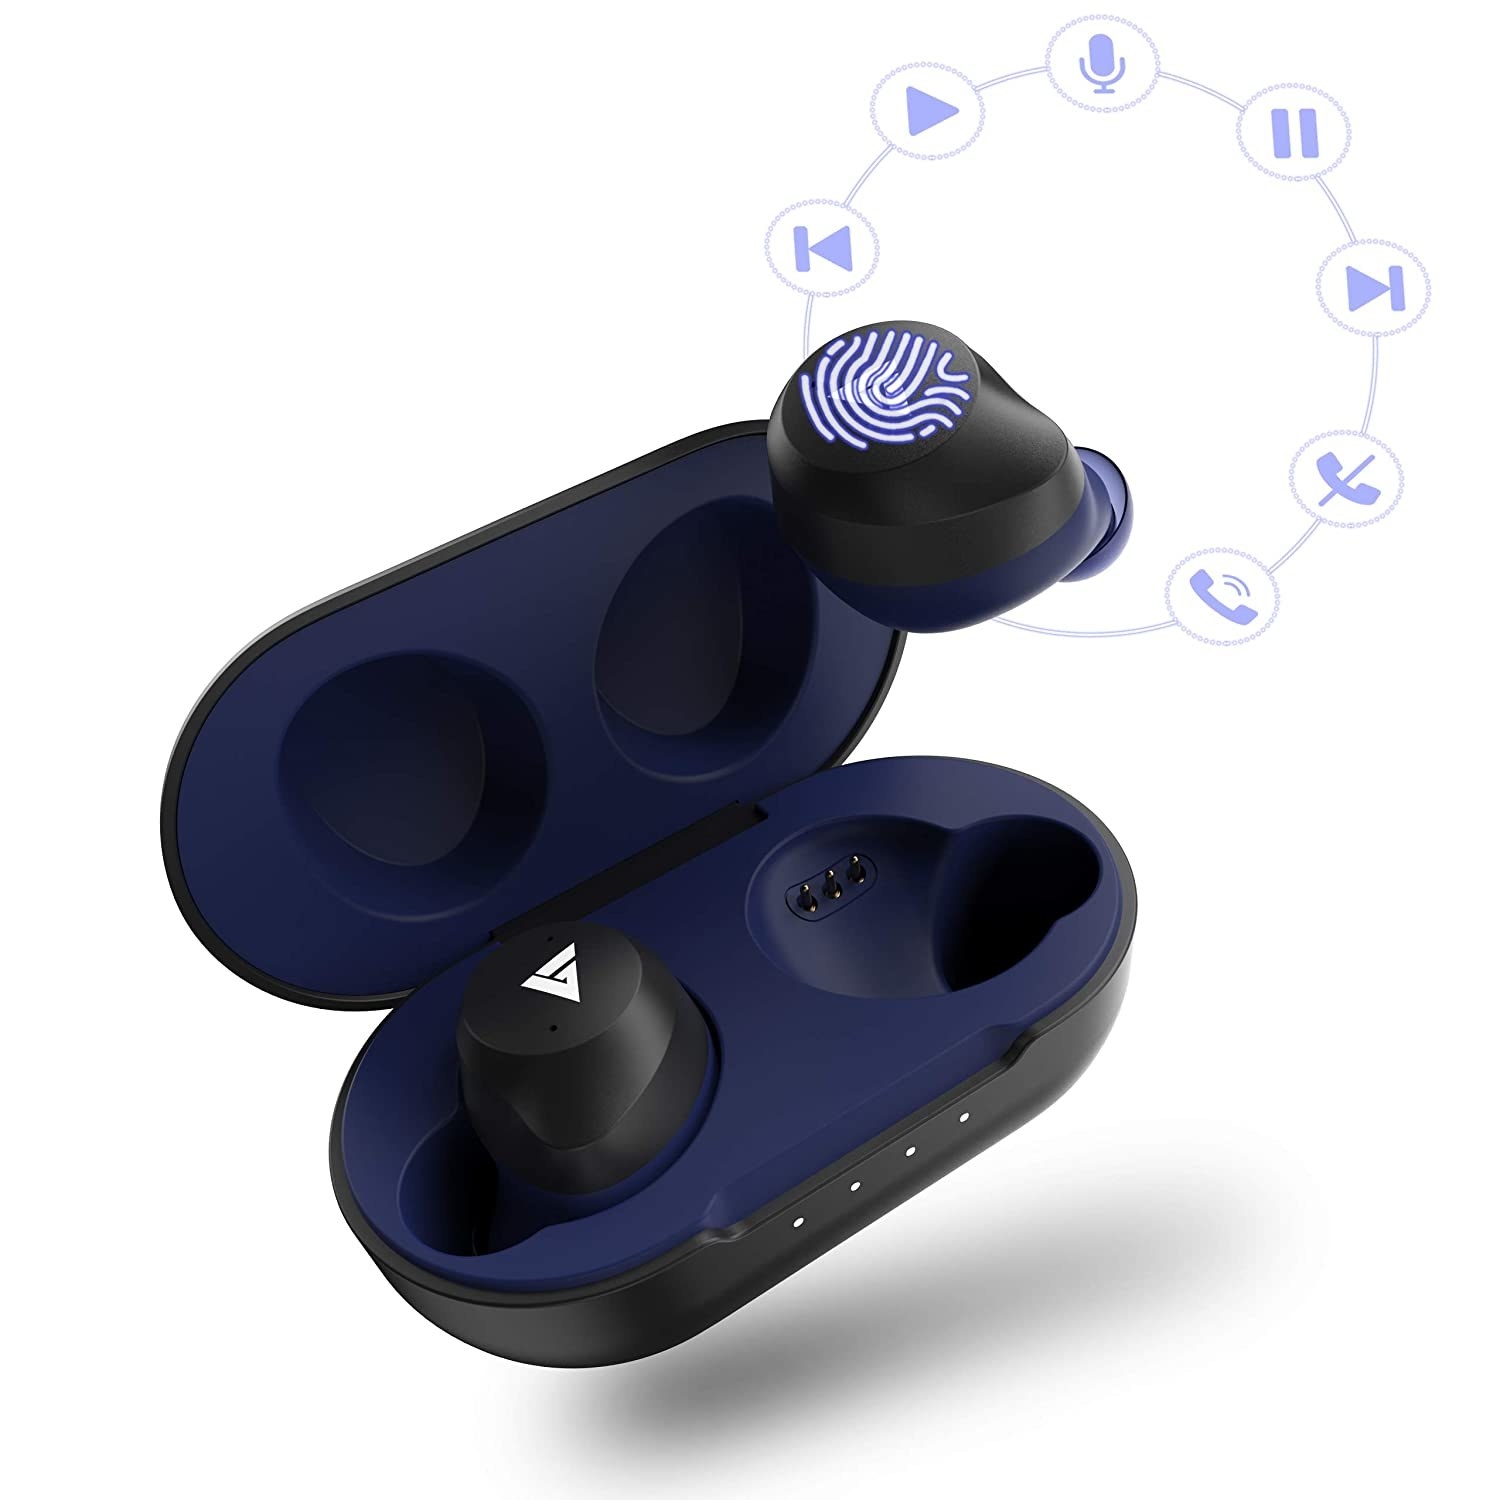 Black and blue Boult Audio AirBass TrueBuds with a charging case